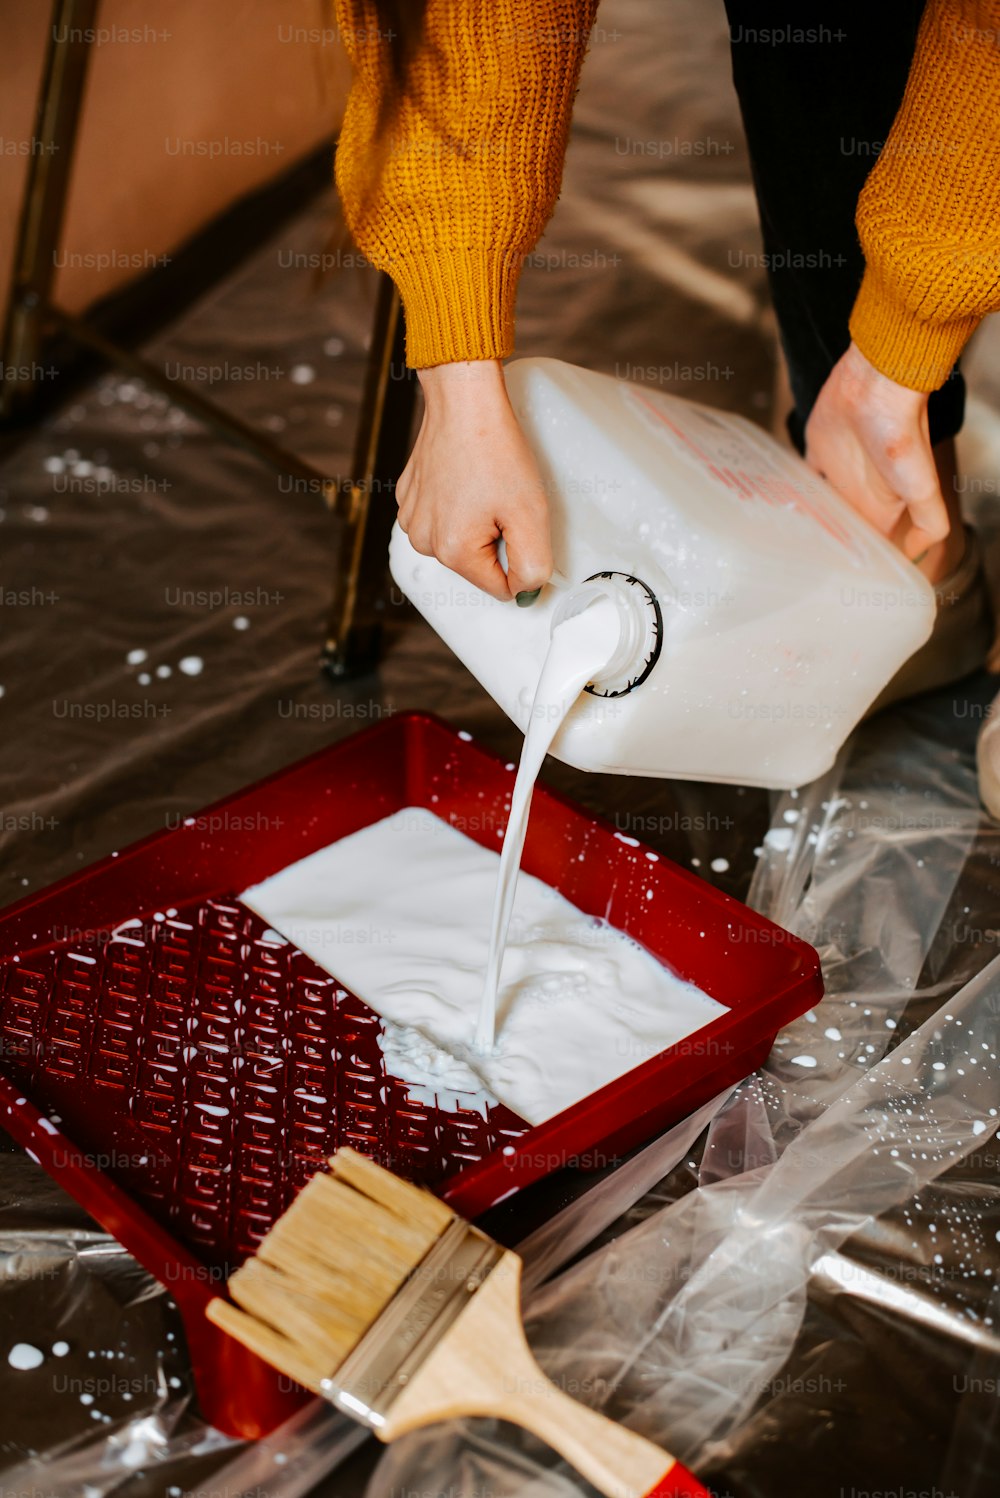 a person pouring milk into a red container